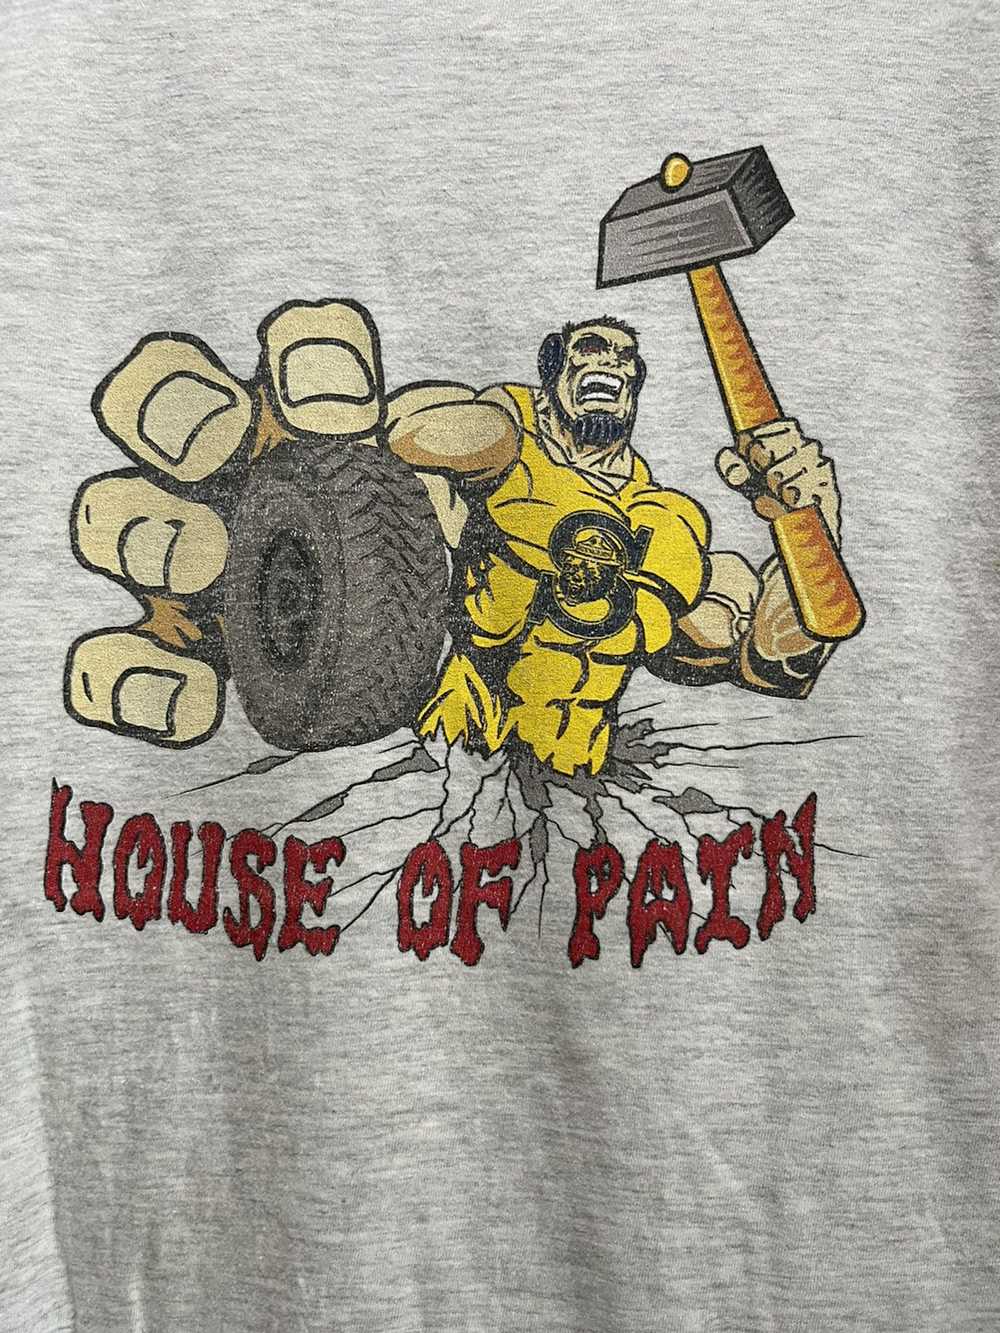 Vintage House of pain ft12 - image 2